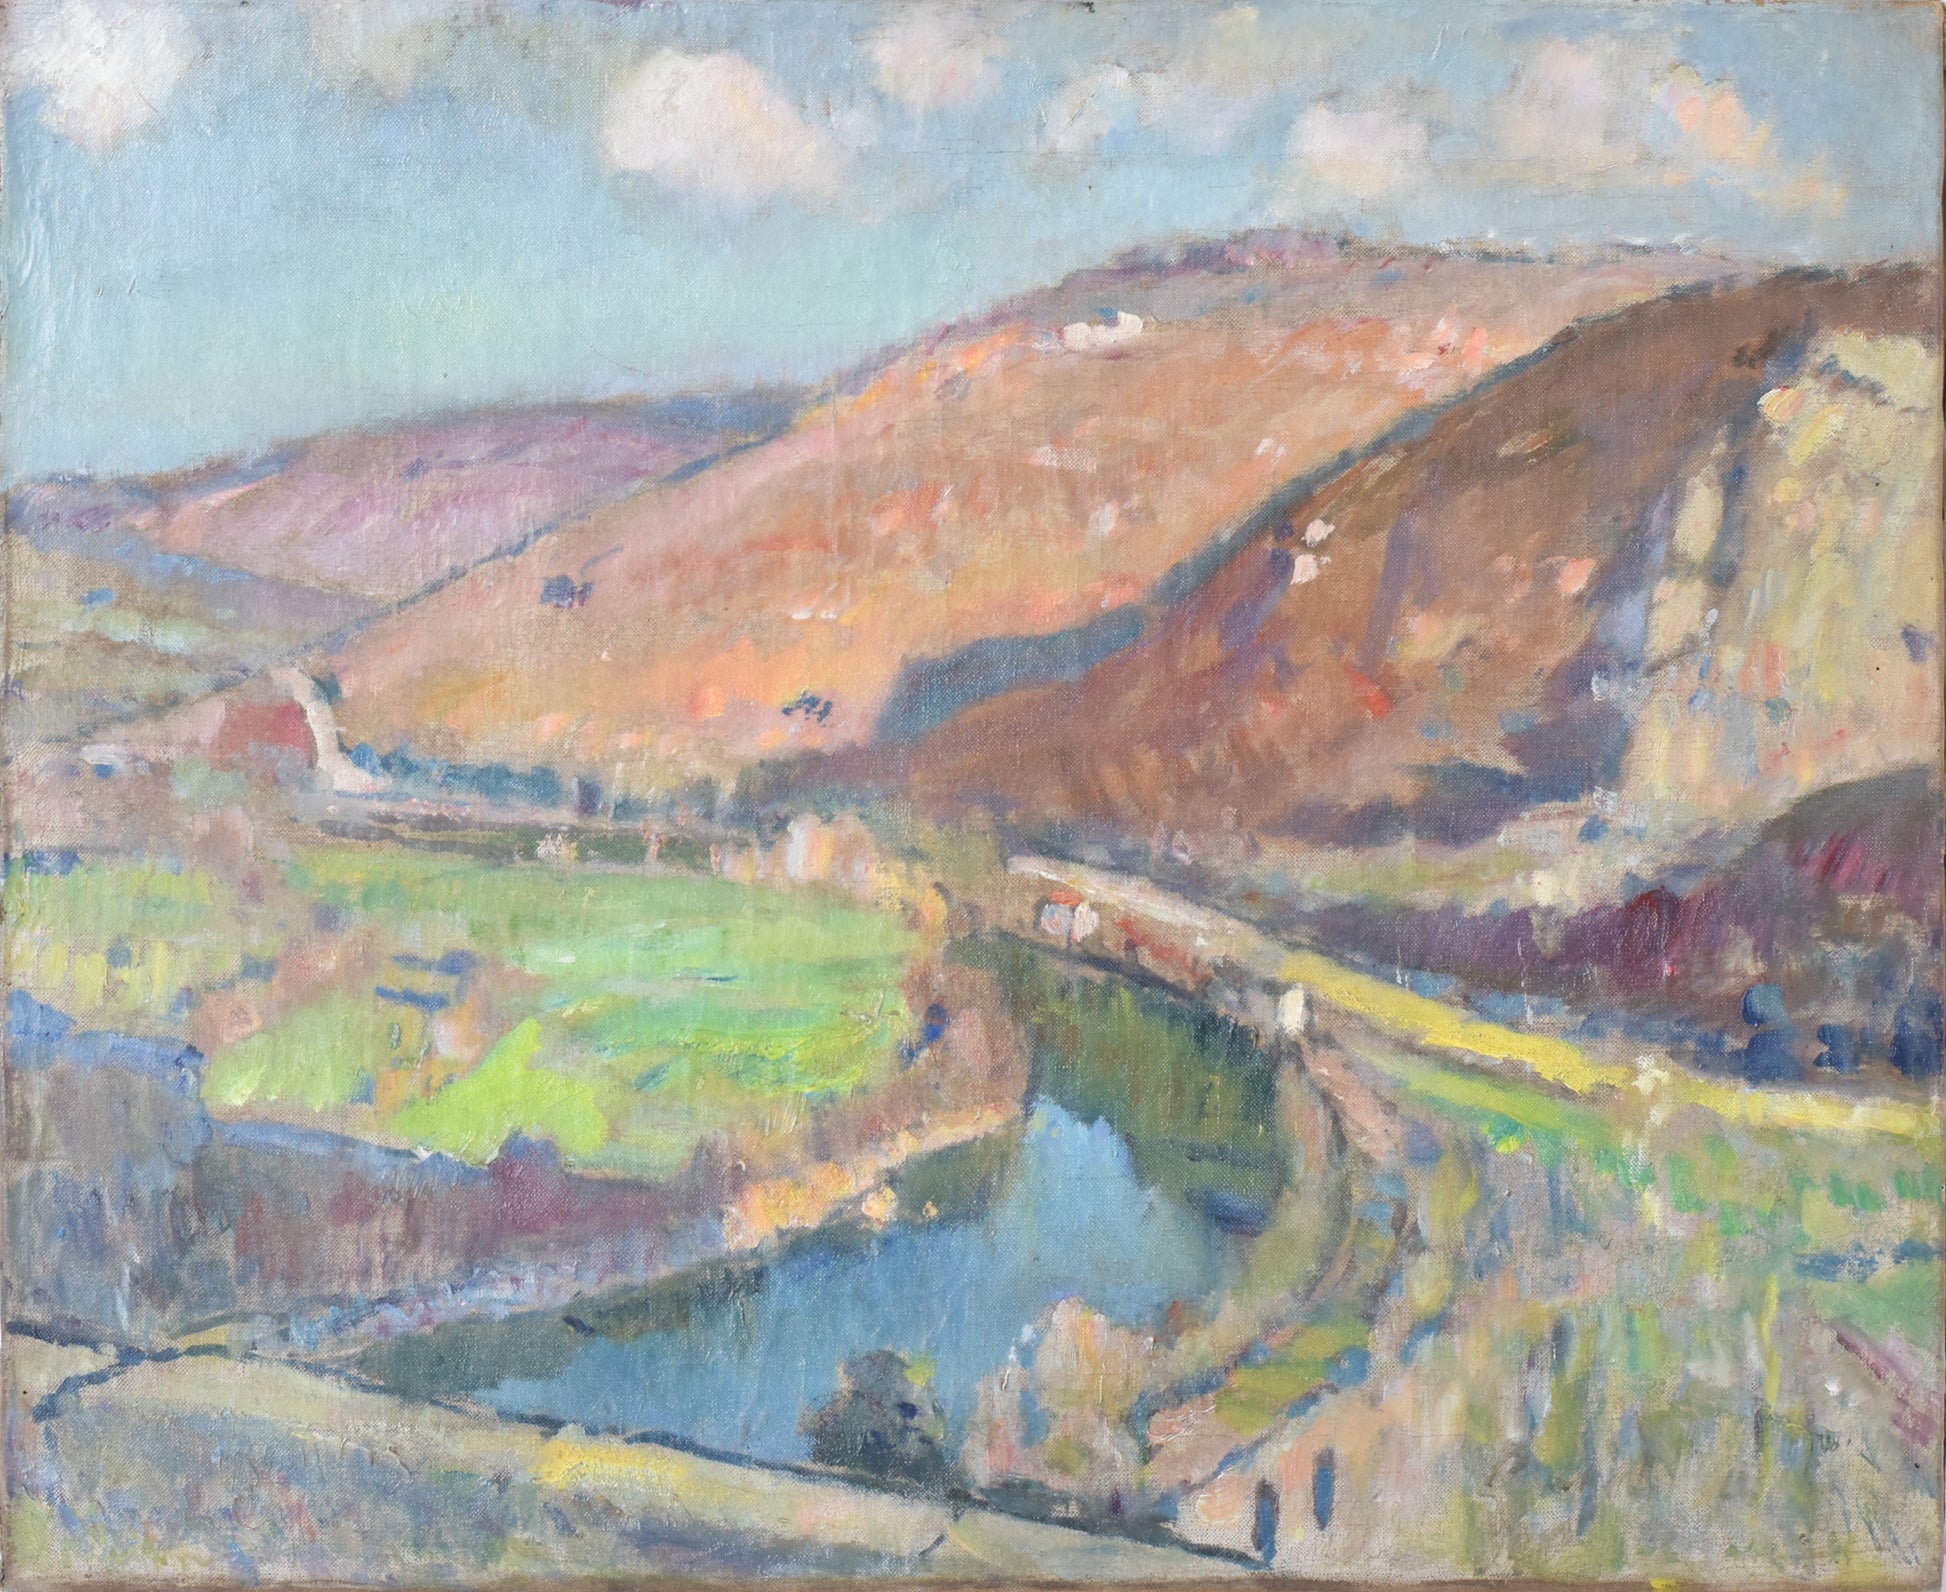 Impressionist Landscape with Hills and River